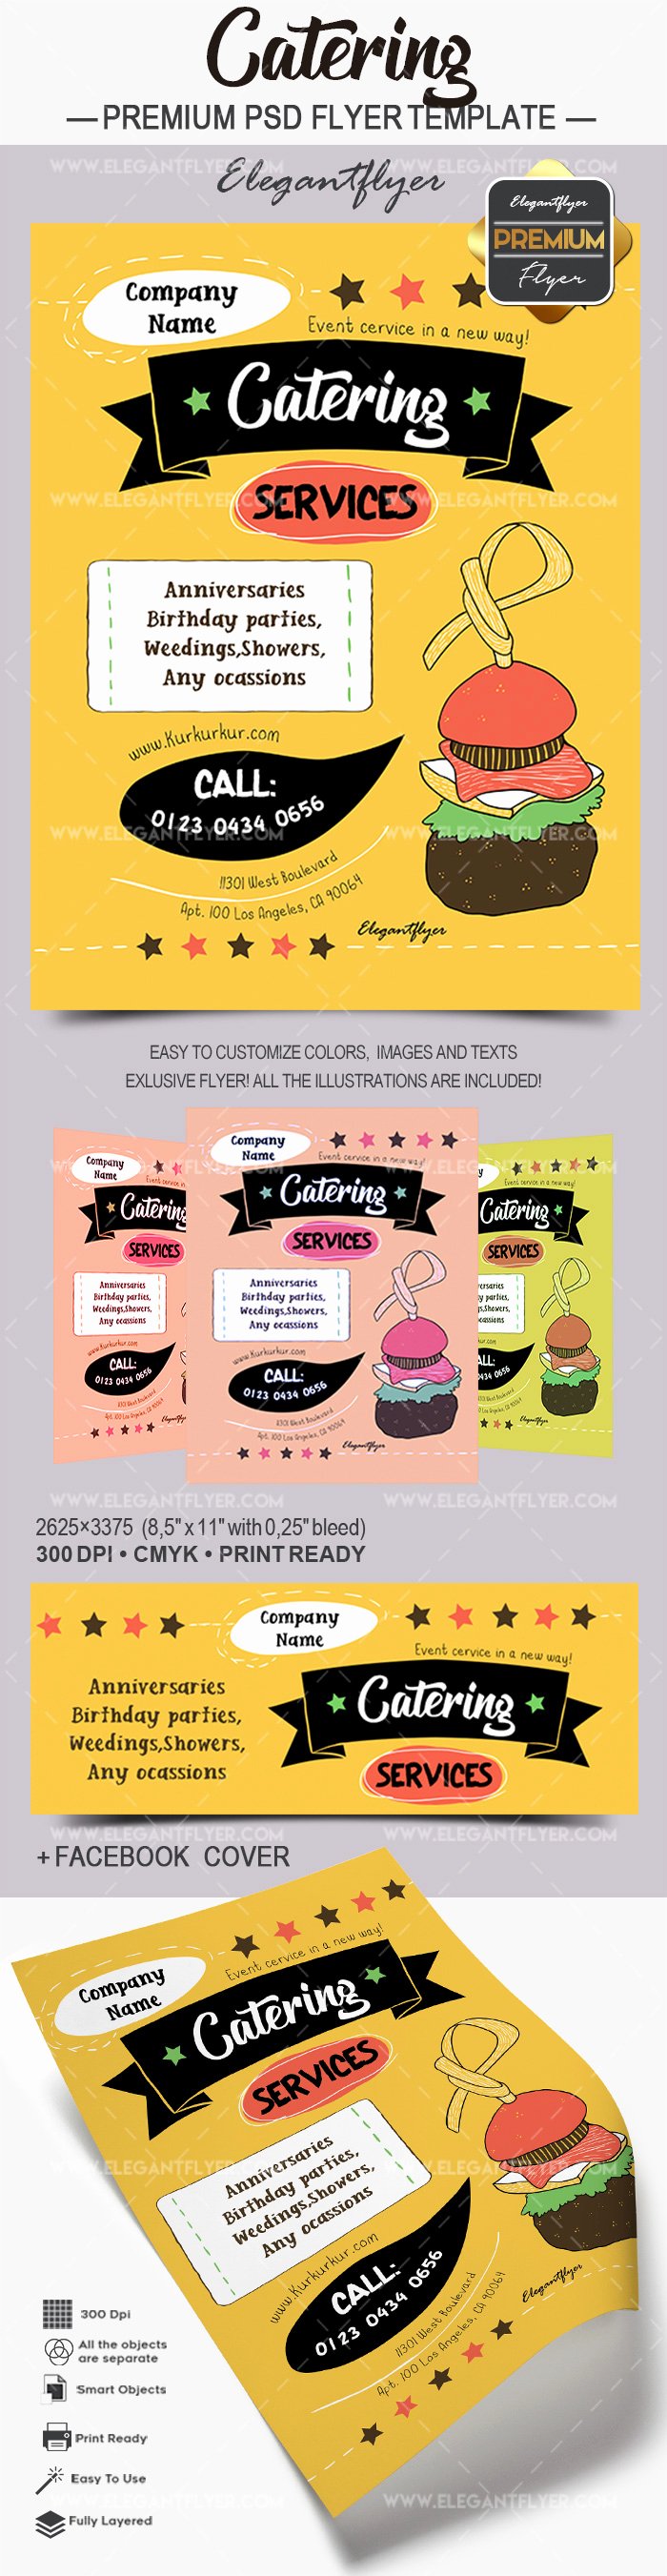 Catering Flyer Template Free Fresh Catering – Premium Flyer Psd Template – by Elegantflyer